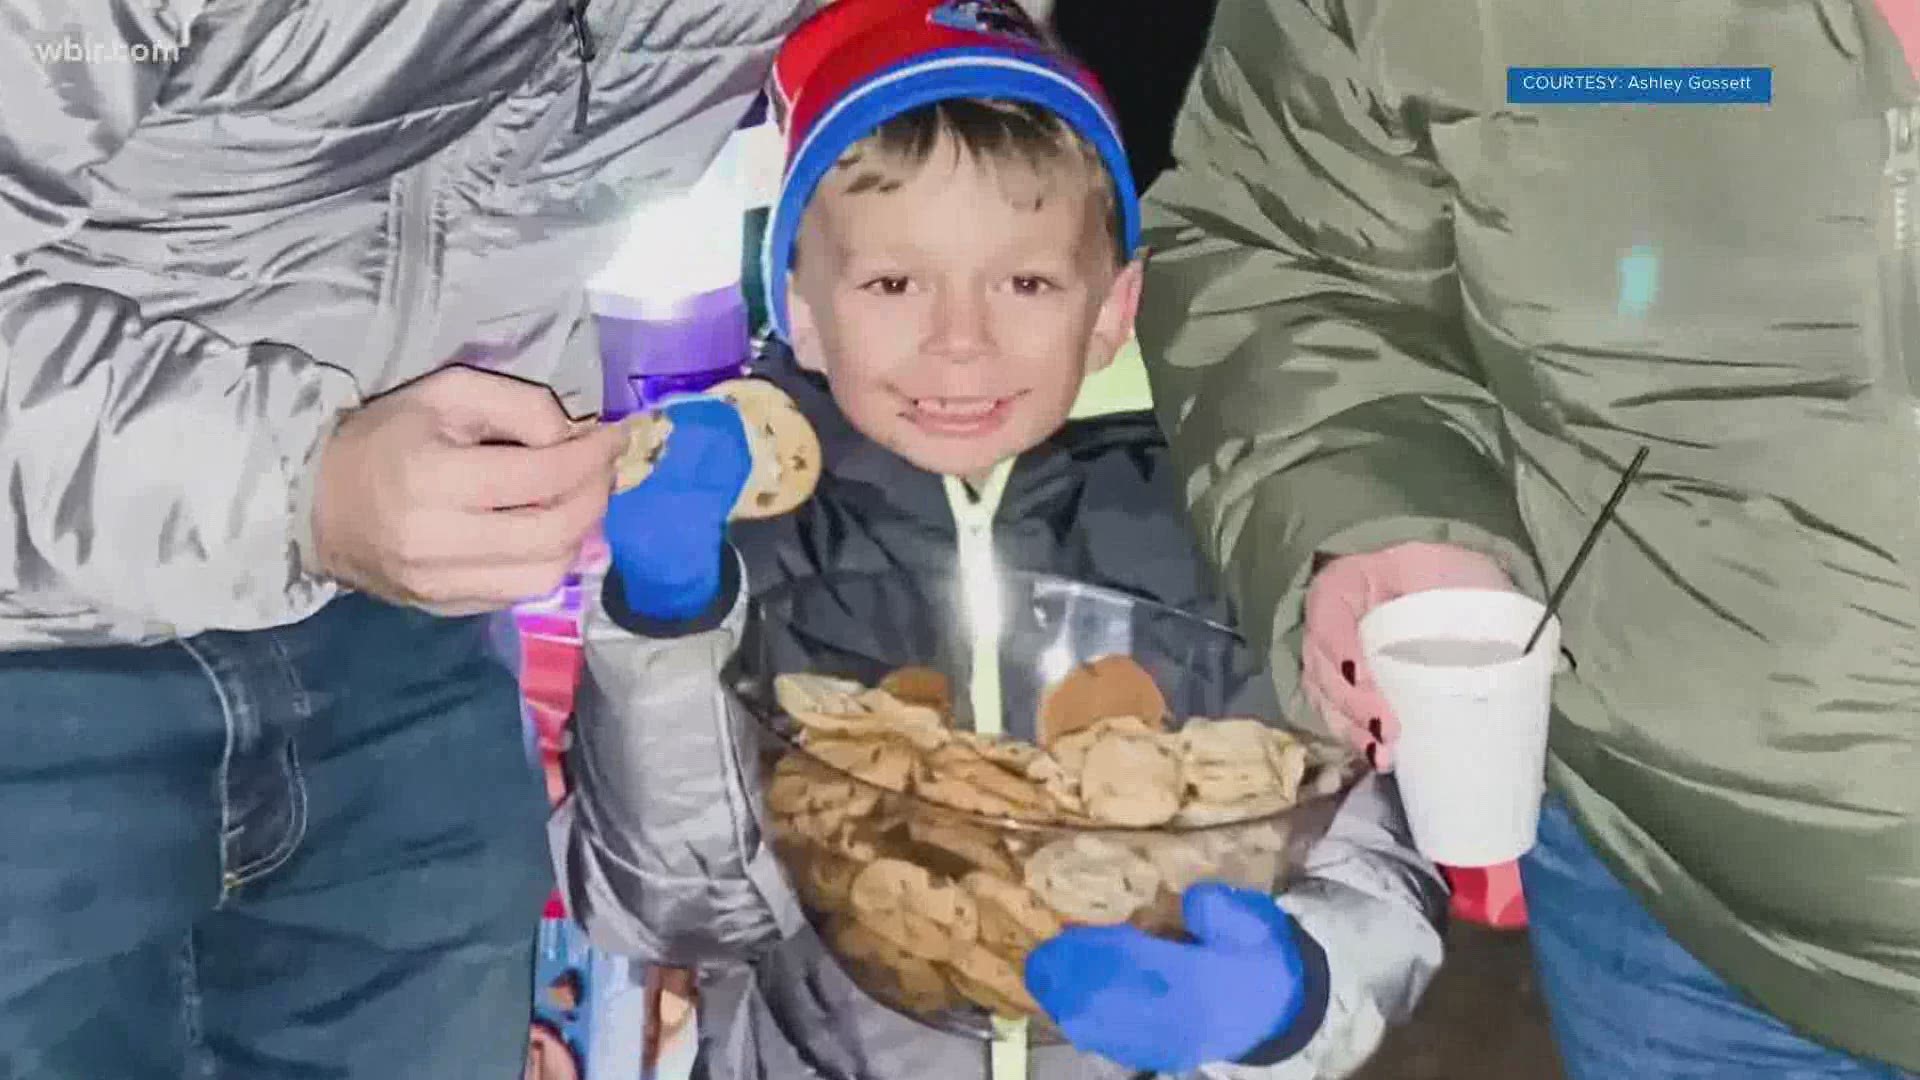 Liam Gossett asked his parents if he could sell hot chocolate to buy Christmas gifts for kids who needed them. No one expected the impact his idea would make.